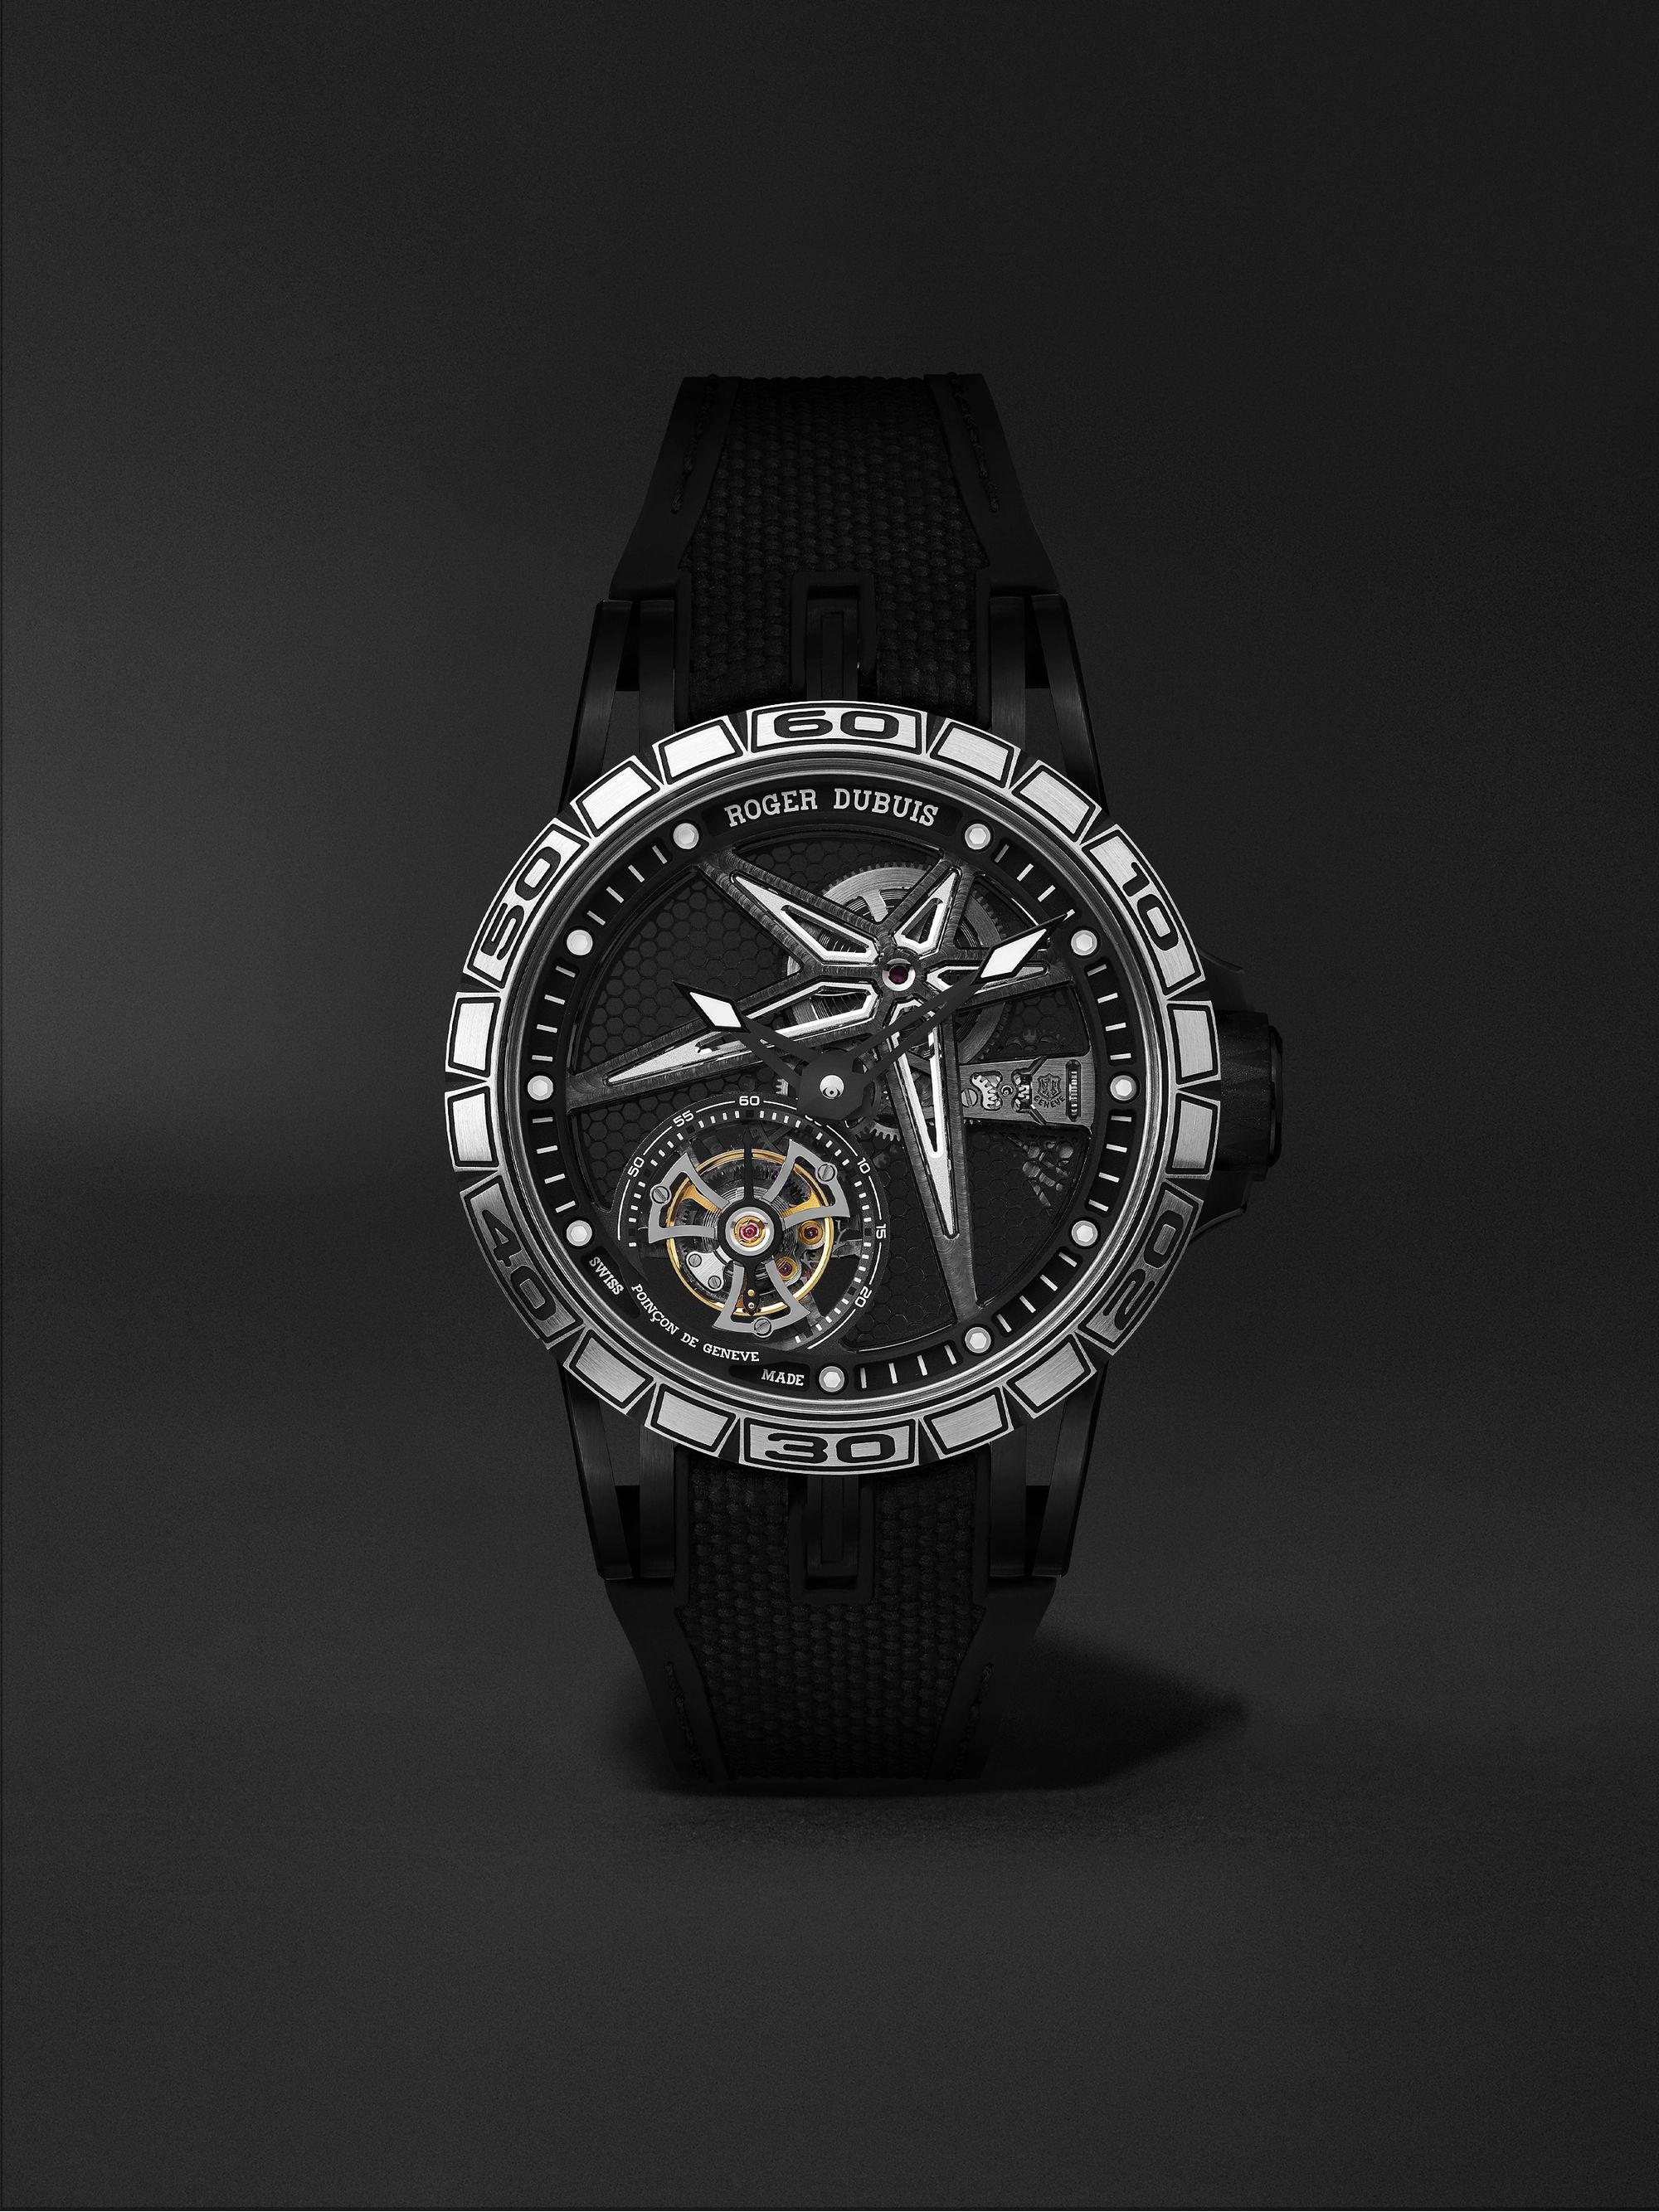 ROGER DUBUIS Excalibur Spider Black DLC Limited Edition Hand-Wound Flying Tourbillon 39mm Titanium and Rubber Watch, Ref. No. RDDBEX0815